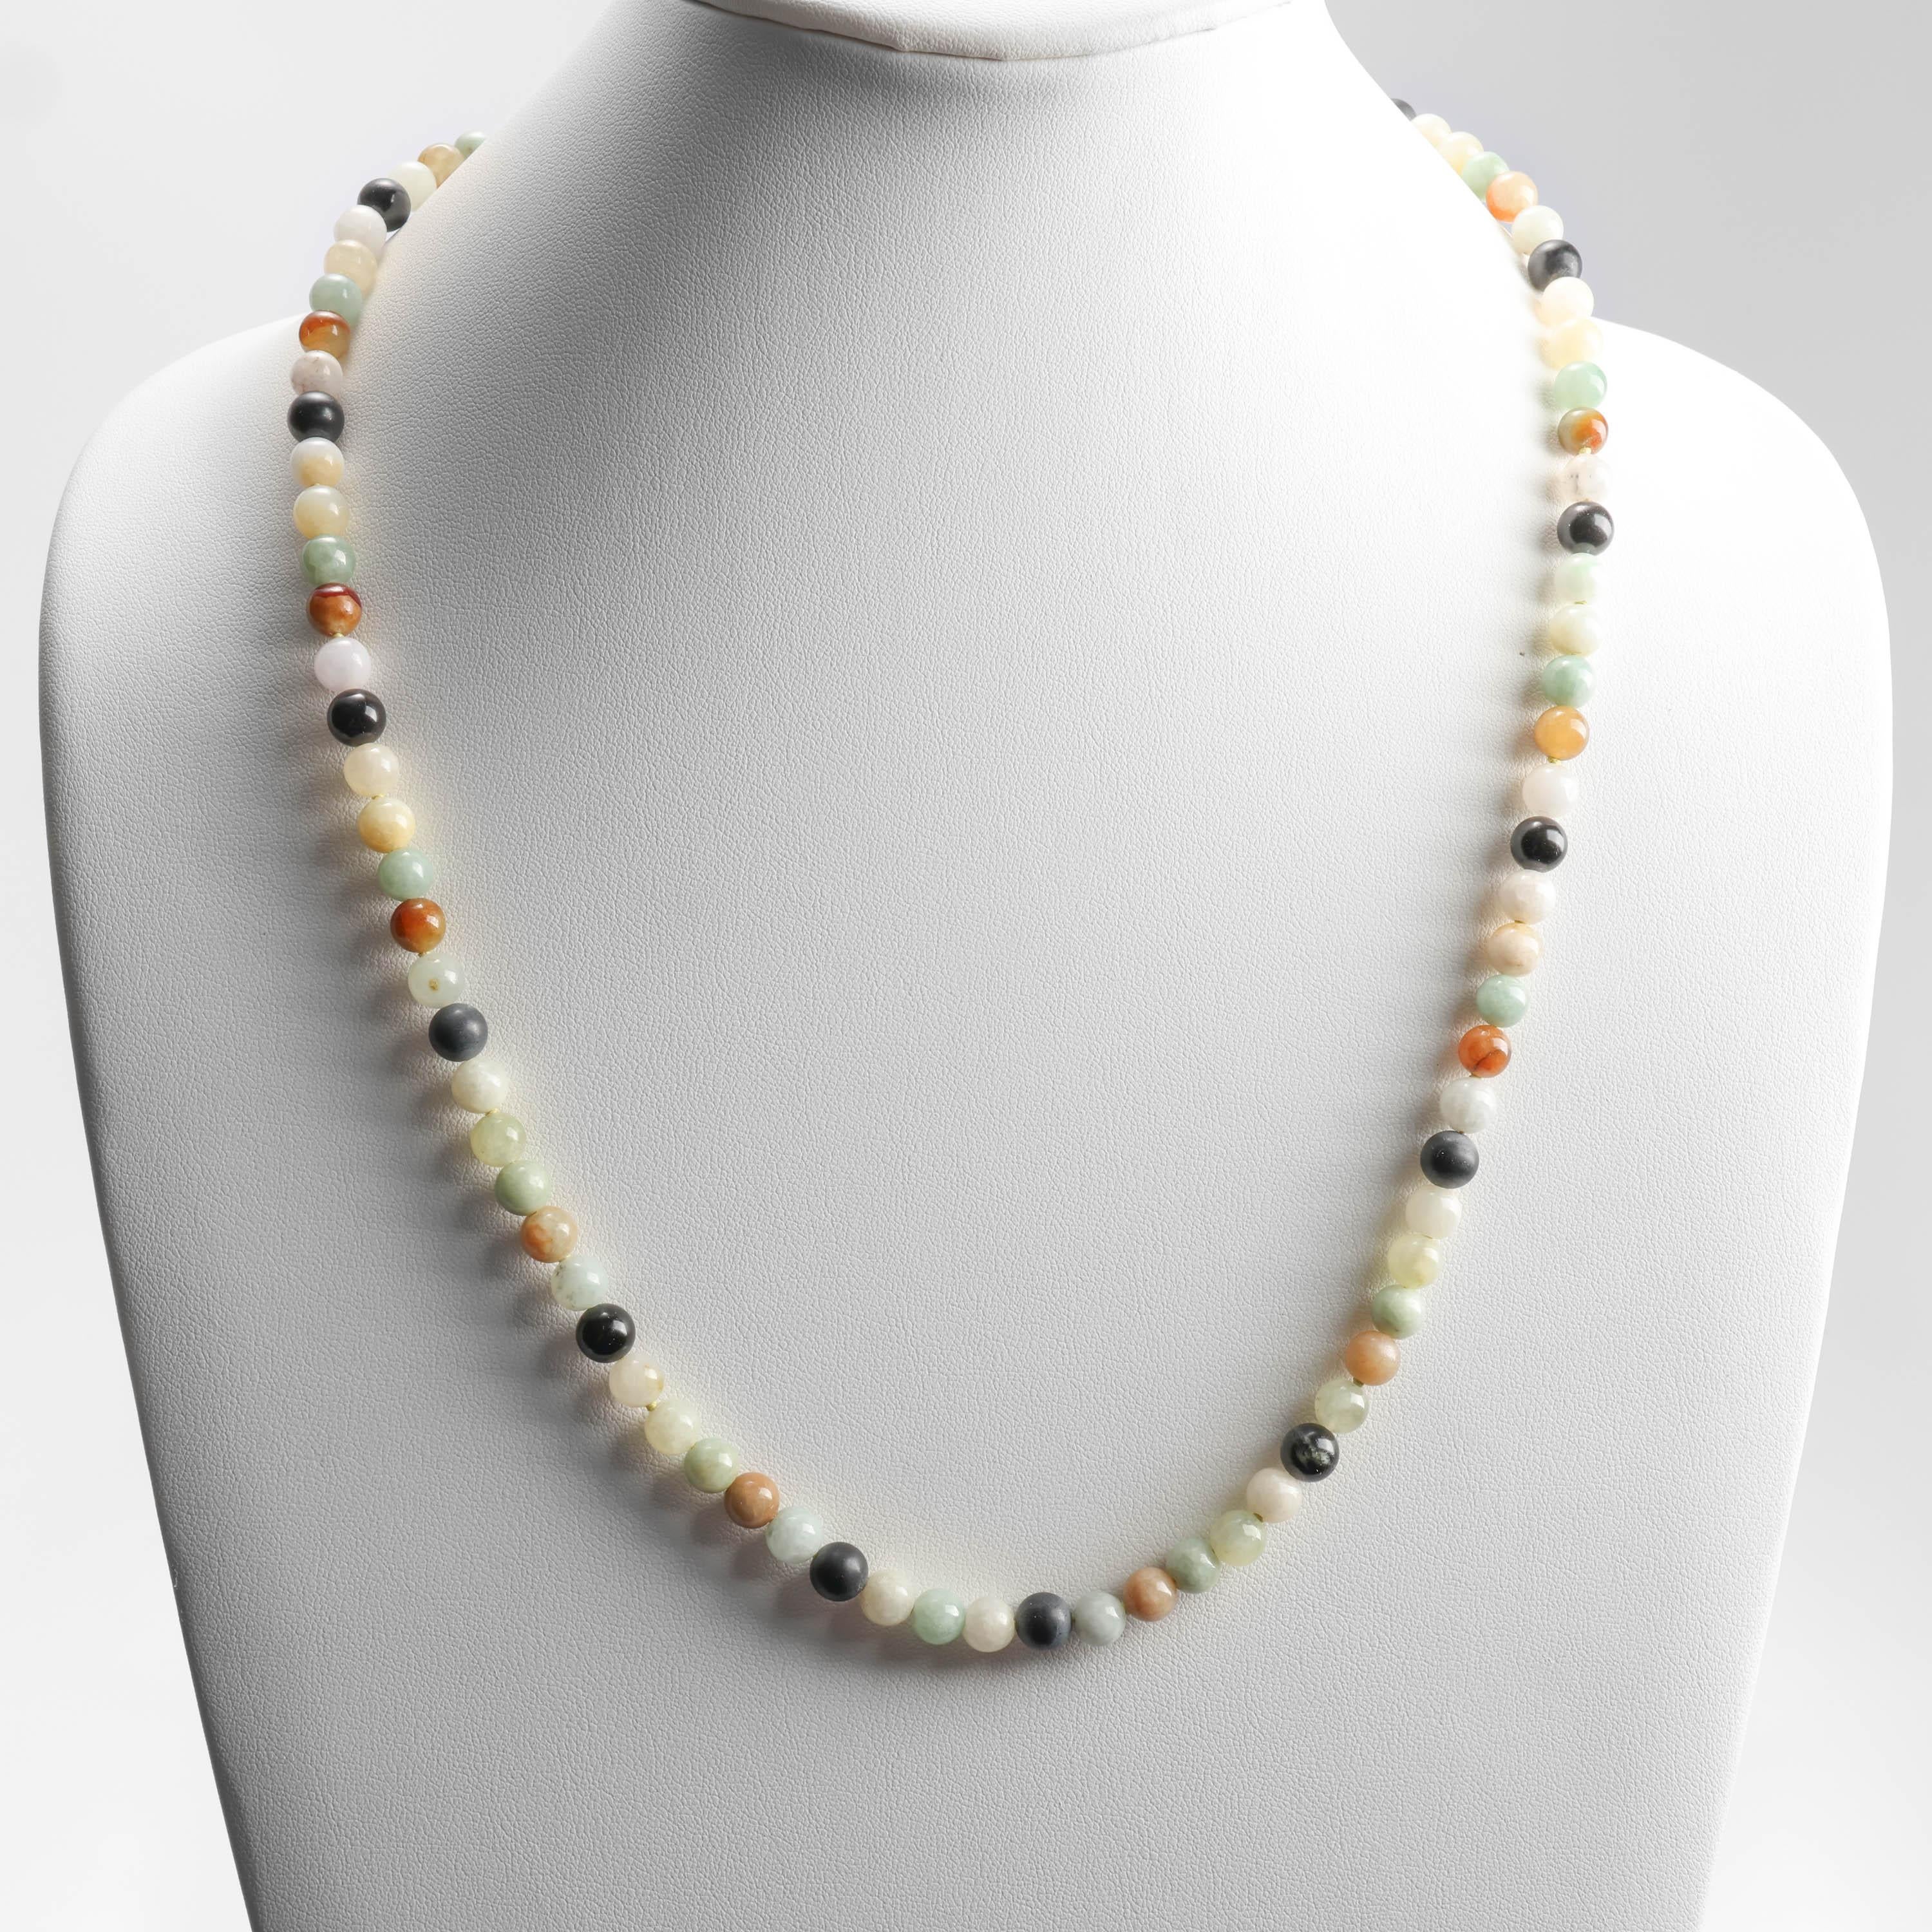 91 luminous, translucent multicolor jadeite jade beads create this stunning Midcentury necklace. The beads here are highly translucent and range in color from various shades of green, light yellow, honey, orange, black, and near colorless. Their